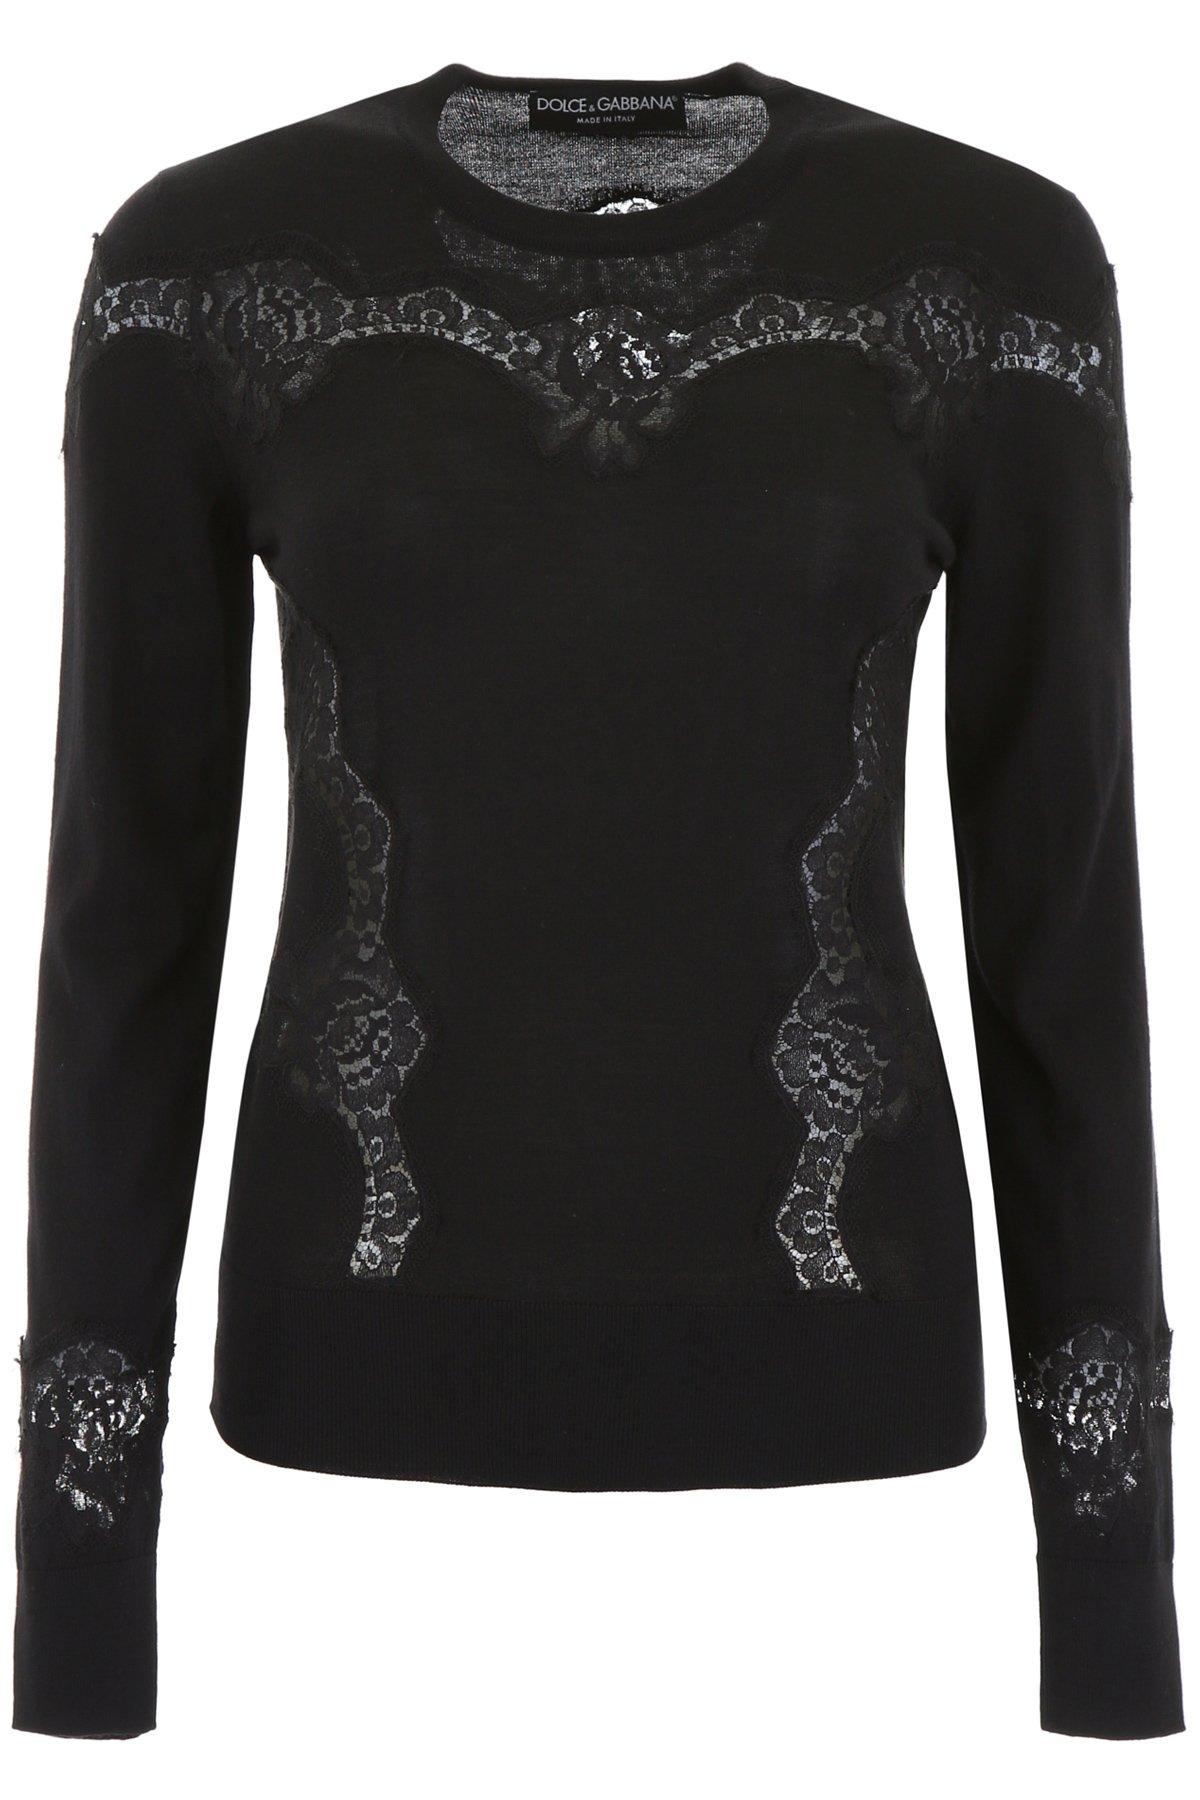 Lyst - Dolce & Gabbana Lace-detail Pullover in Black